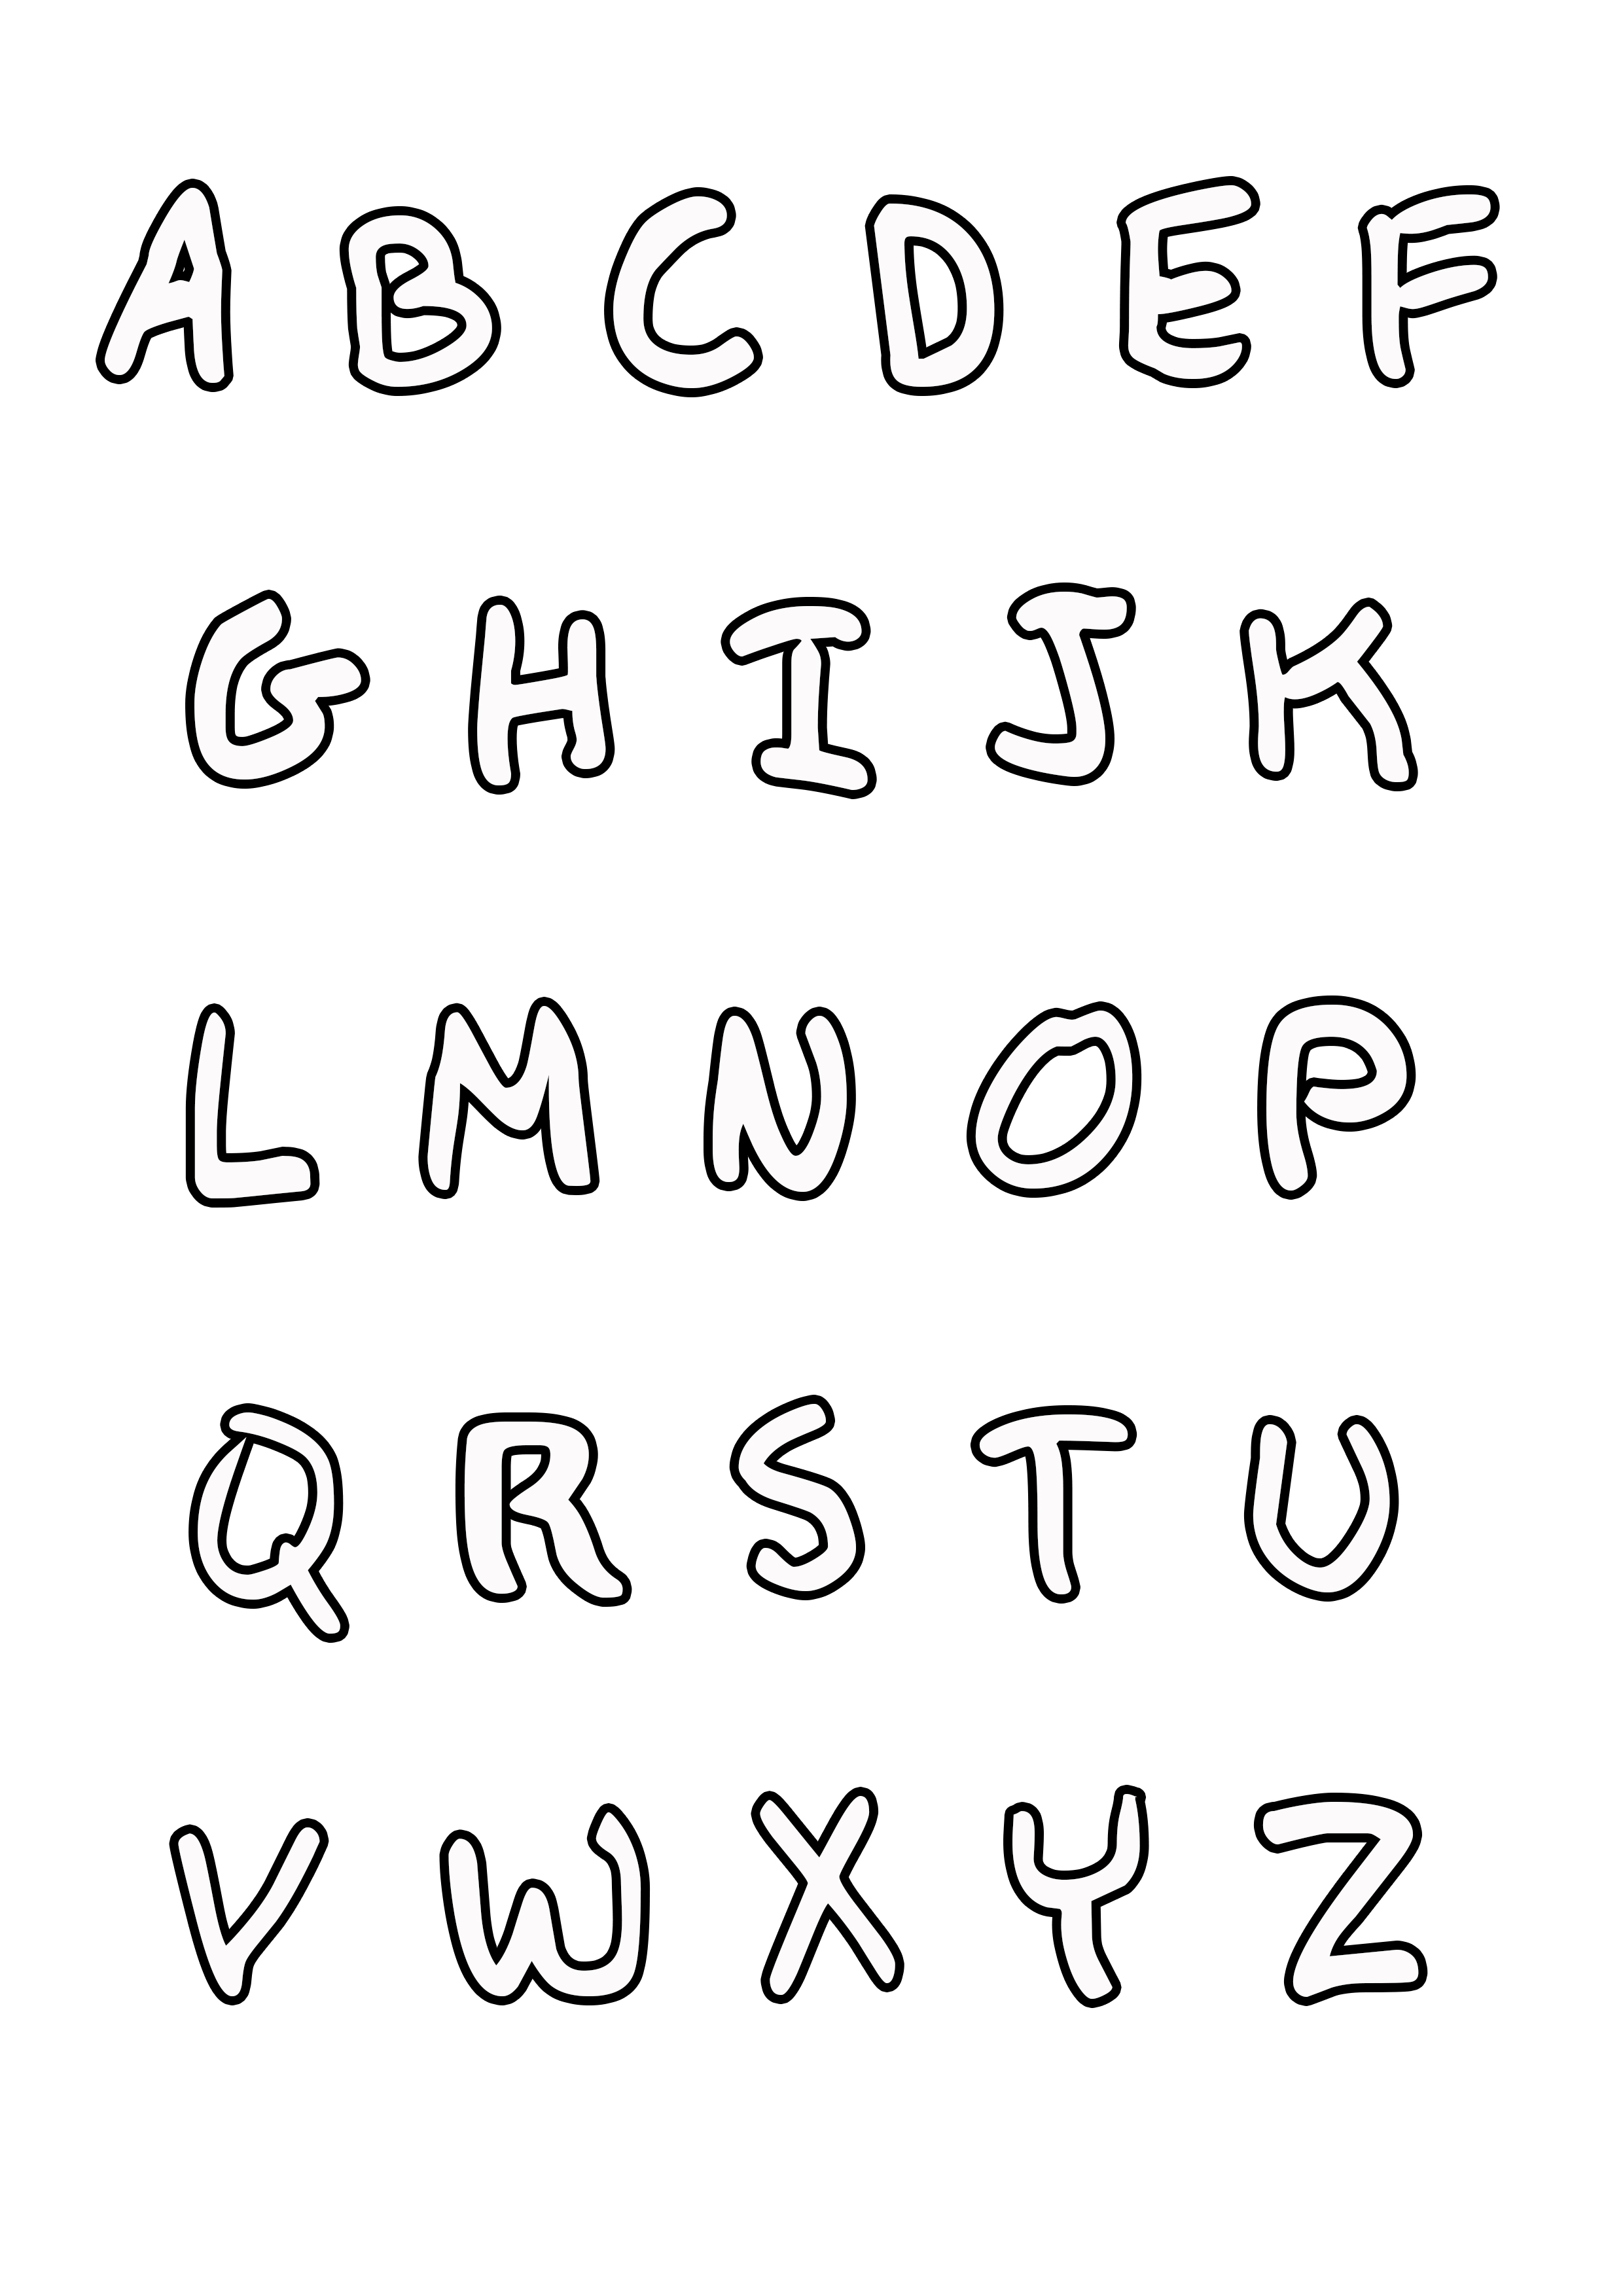 A to Z alphabets drawing step by step/ easy drawing video #drawing #how  #drawingforkids - YouTube